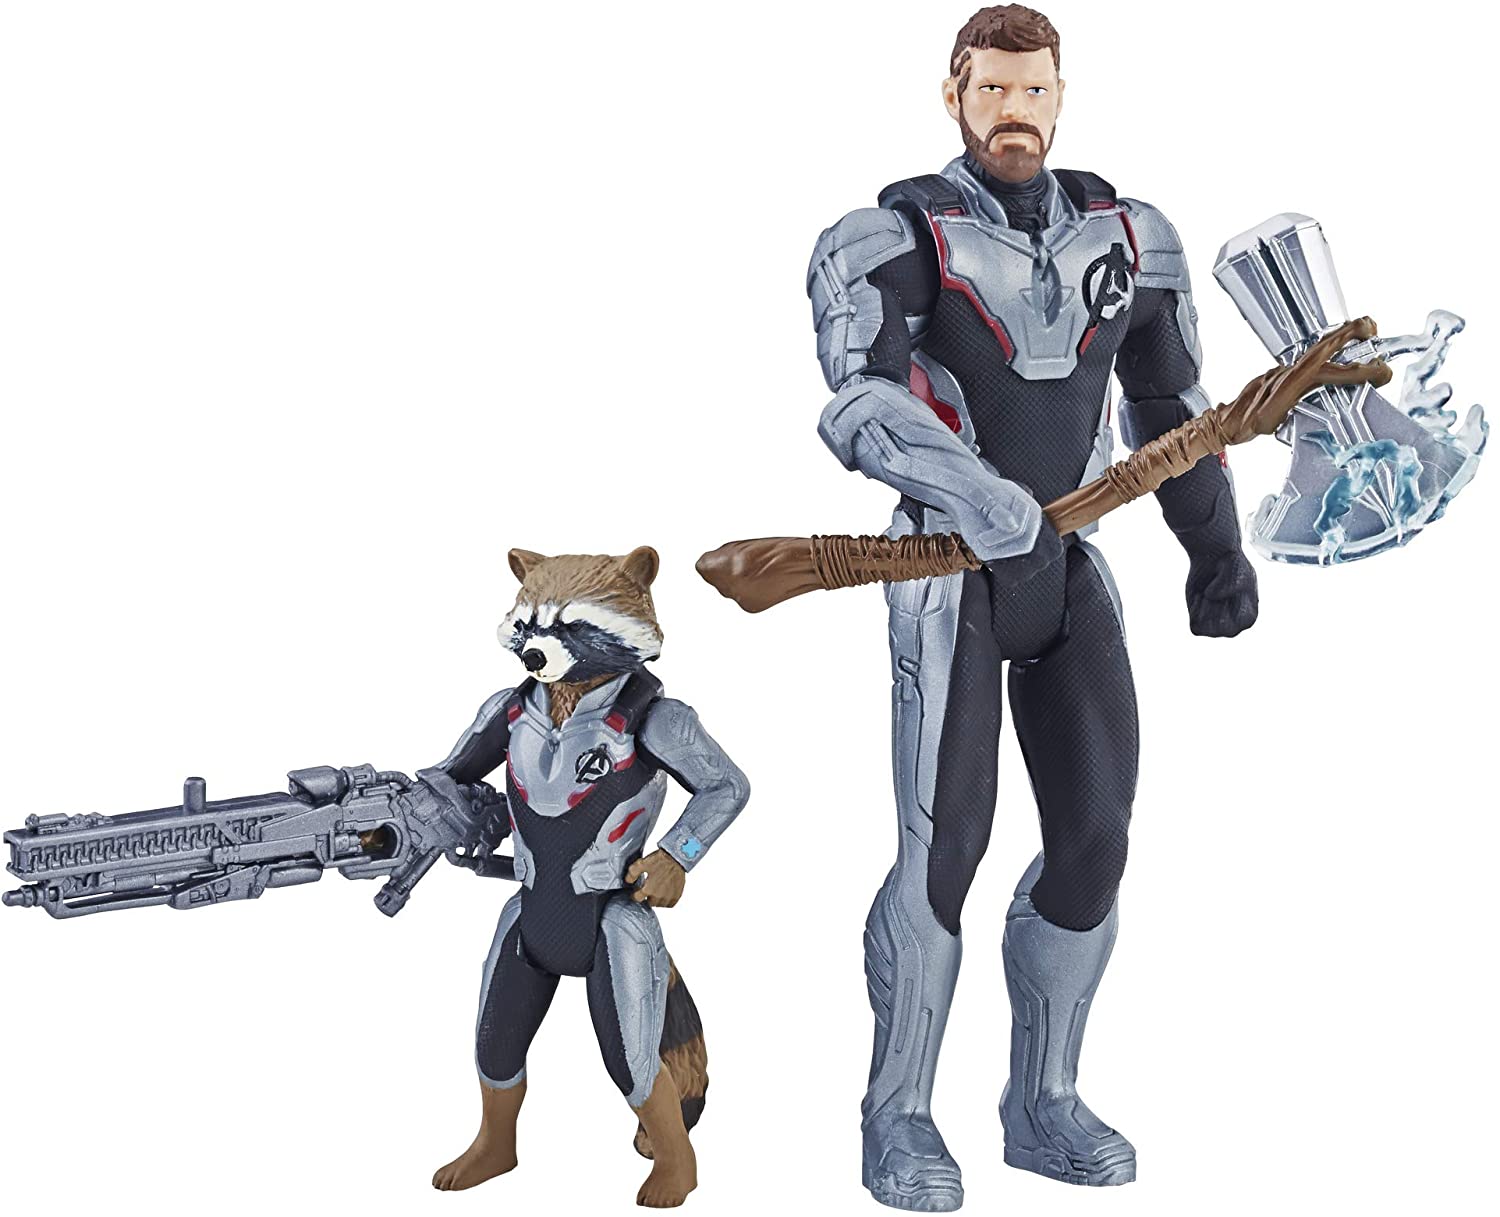 Avengers Marvel Endgame Thor & Rocket Raccoon 2 Pack Characters from Marvel Cinematic Universe Mcu Movies, Toys & Games